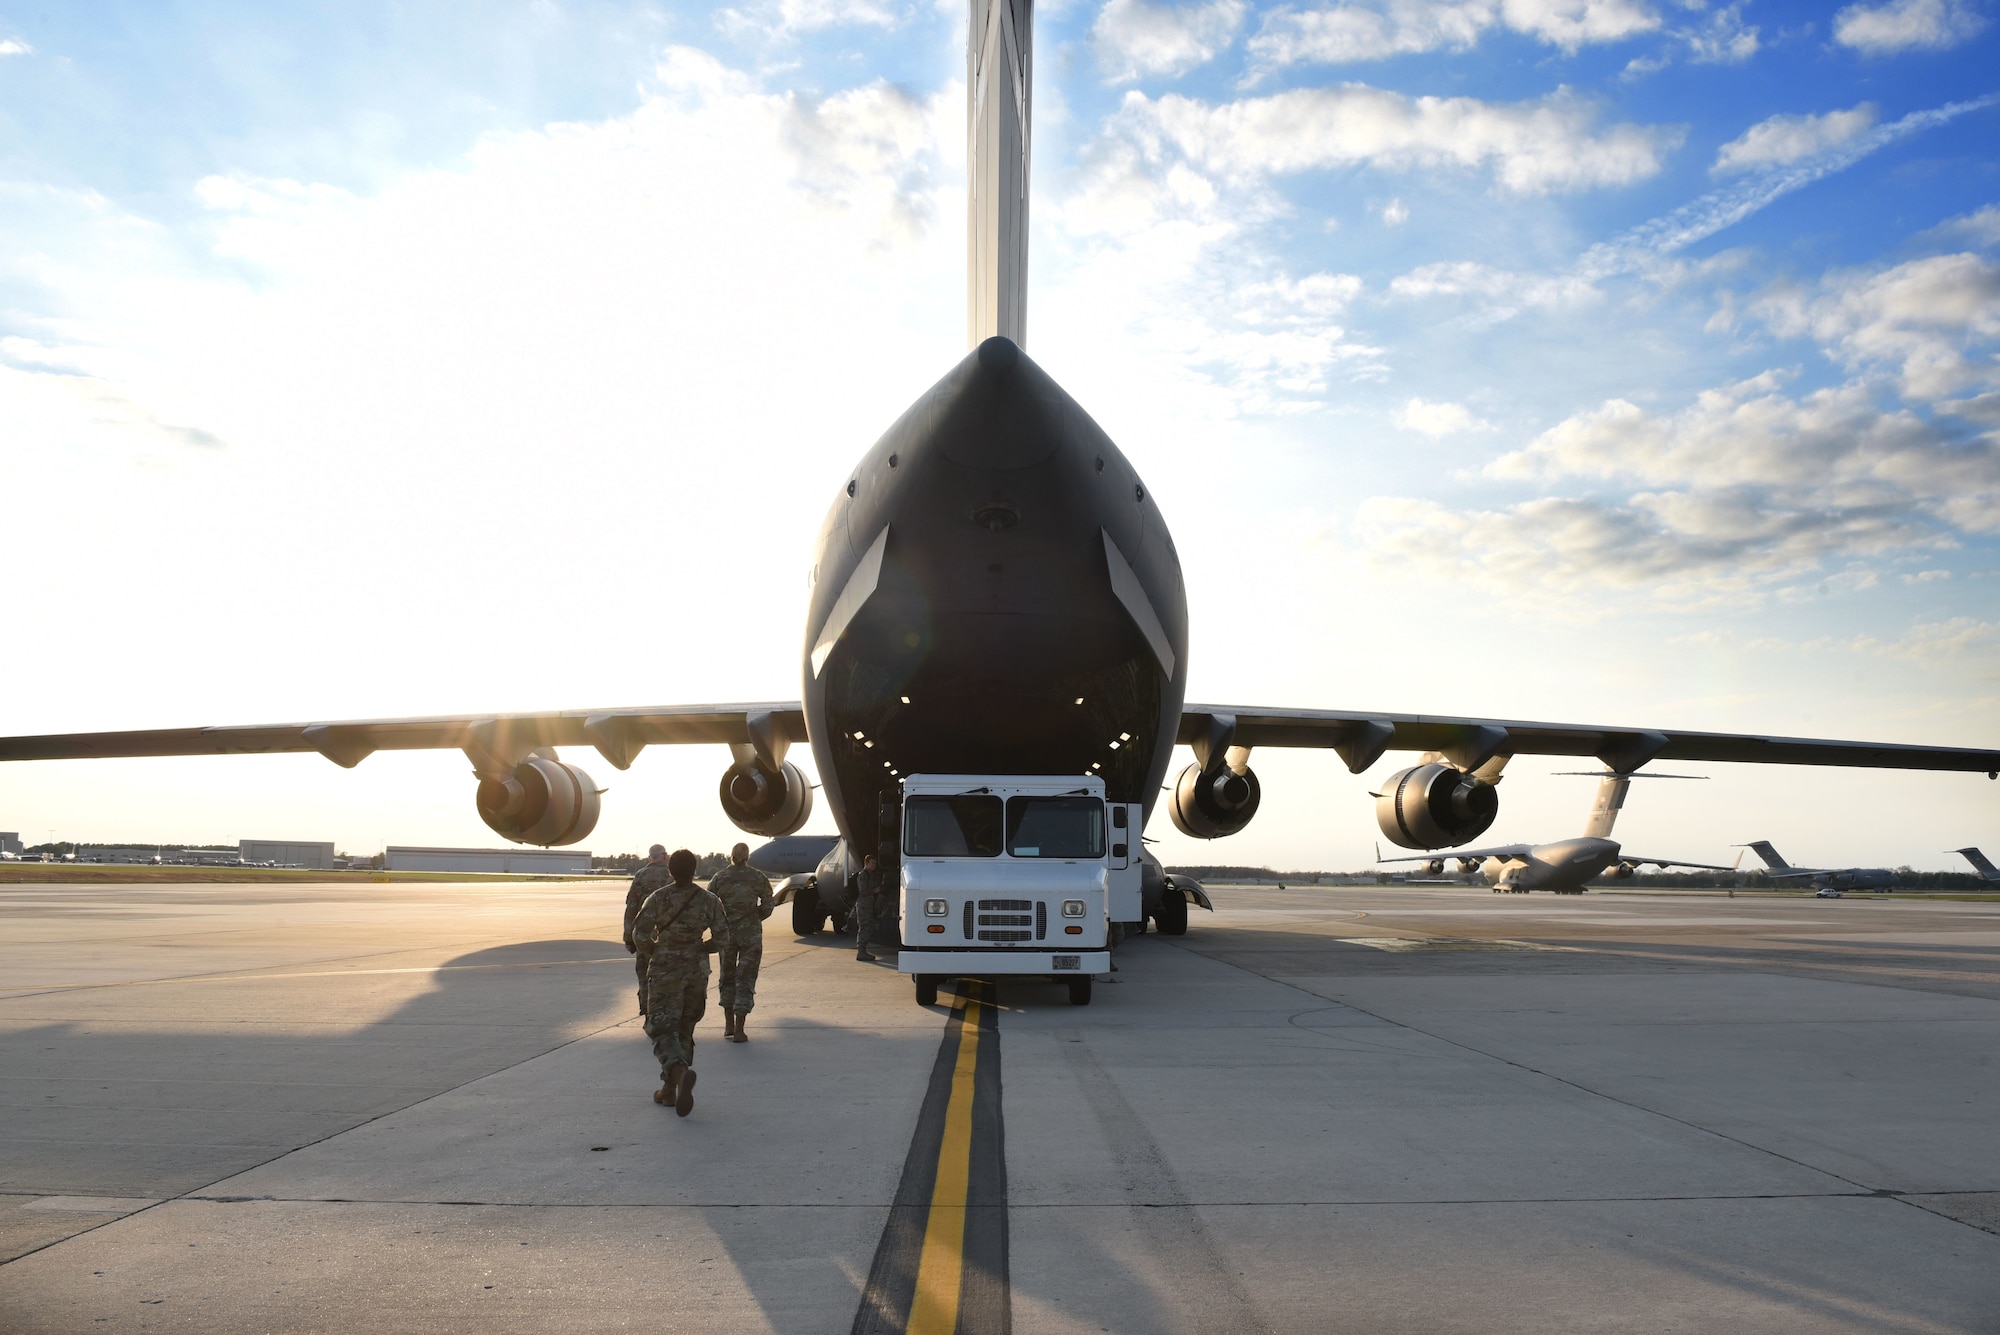 Airmen walk toward a C-17 Globemaster III assigned to Wright-Patterson Air Force Base, Ohio, at Joint Base McGuire-Dix-Lakehurst, N.J., April 5, 2020. The C-17 carried Airmen from Ohio and western Pennsylvania who are in transition to New York City in support of U.S. Northern Command providing military support to help combat the spread of COVID-19. (U.S. Air Force photo by Staff Sgt. Stephanie Serrano)